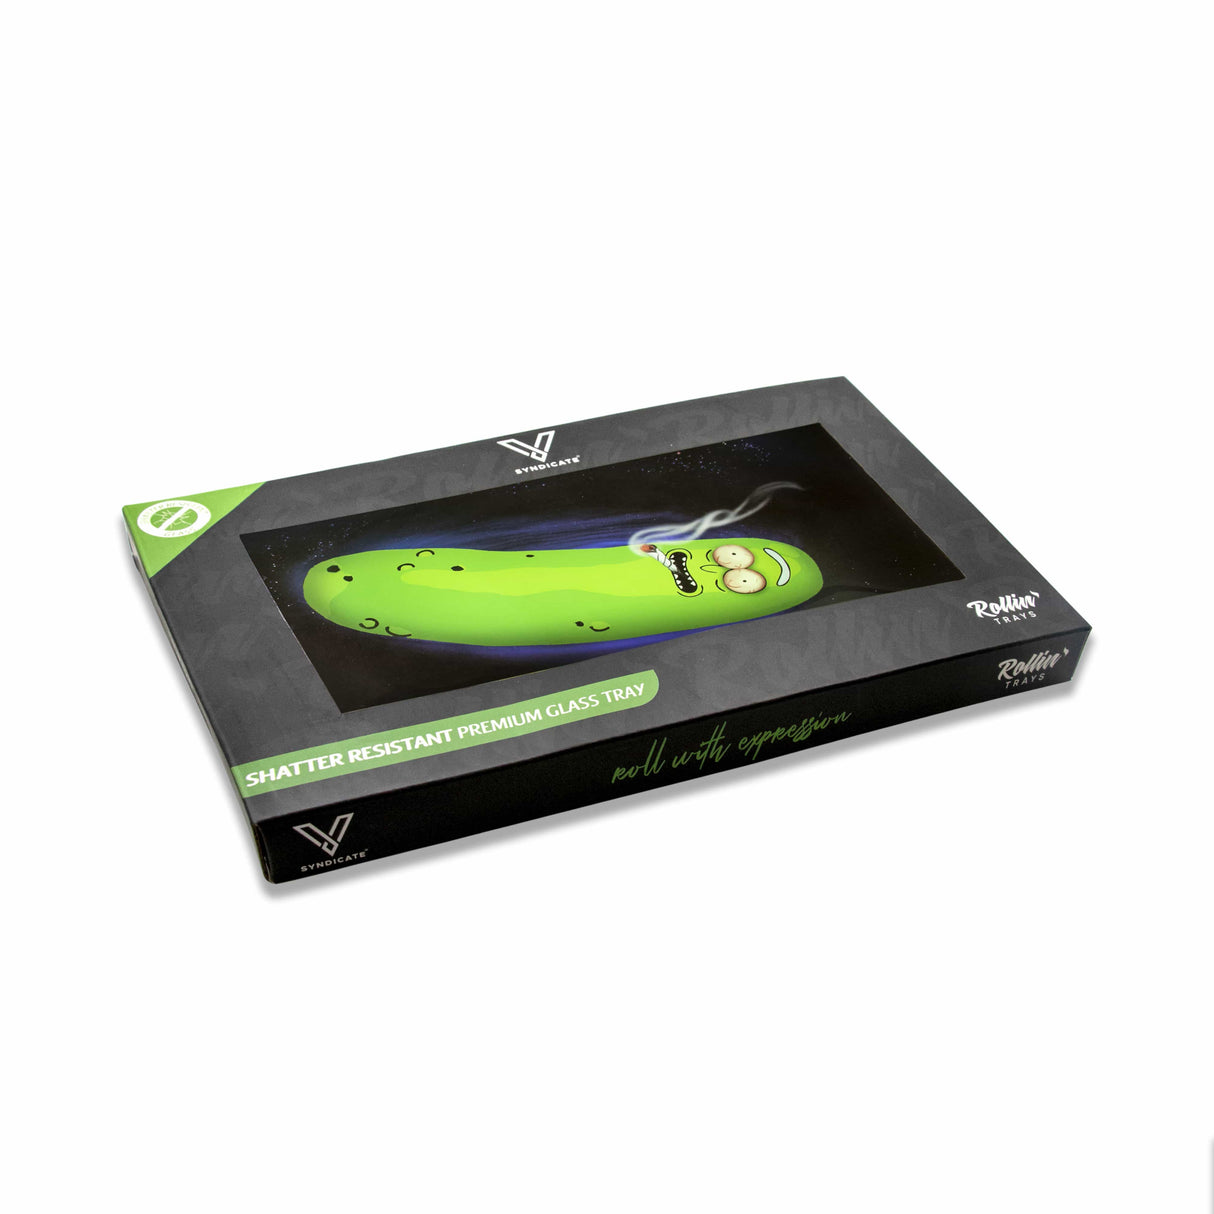 V Syndicate Pickle Glass Tray - Medium Size, Black & Green, Portable Design, Angled View